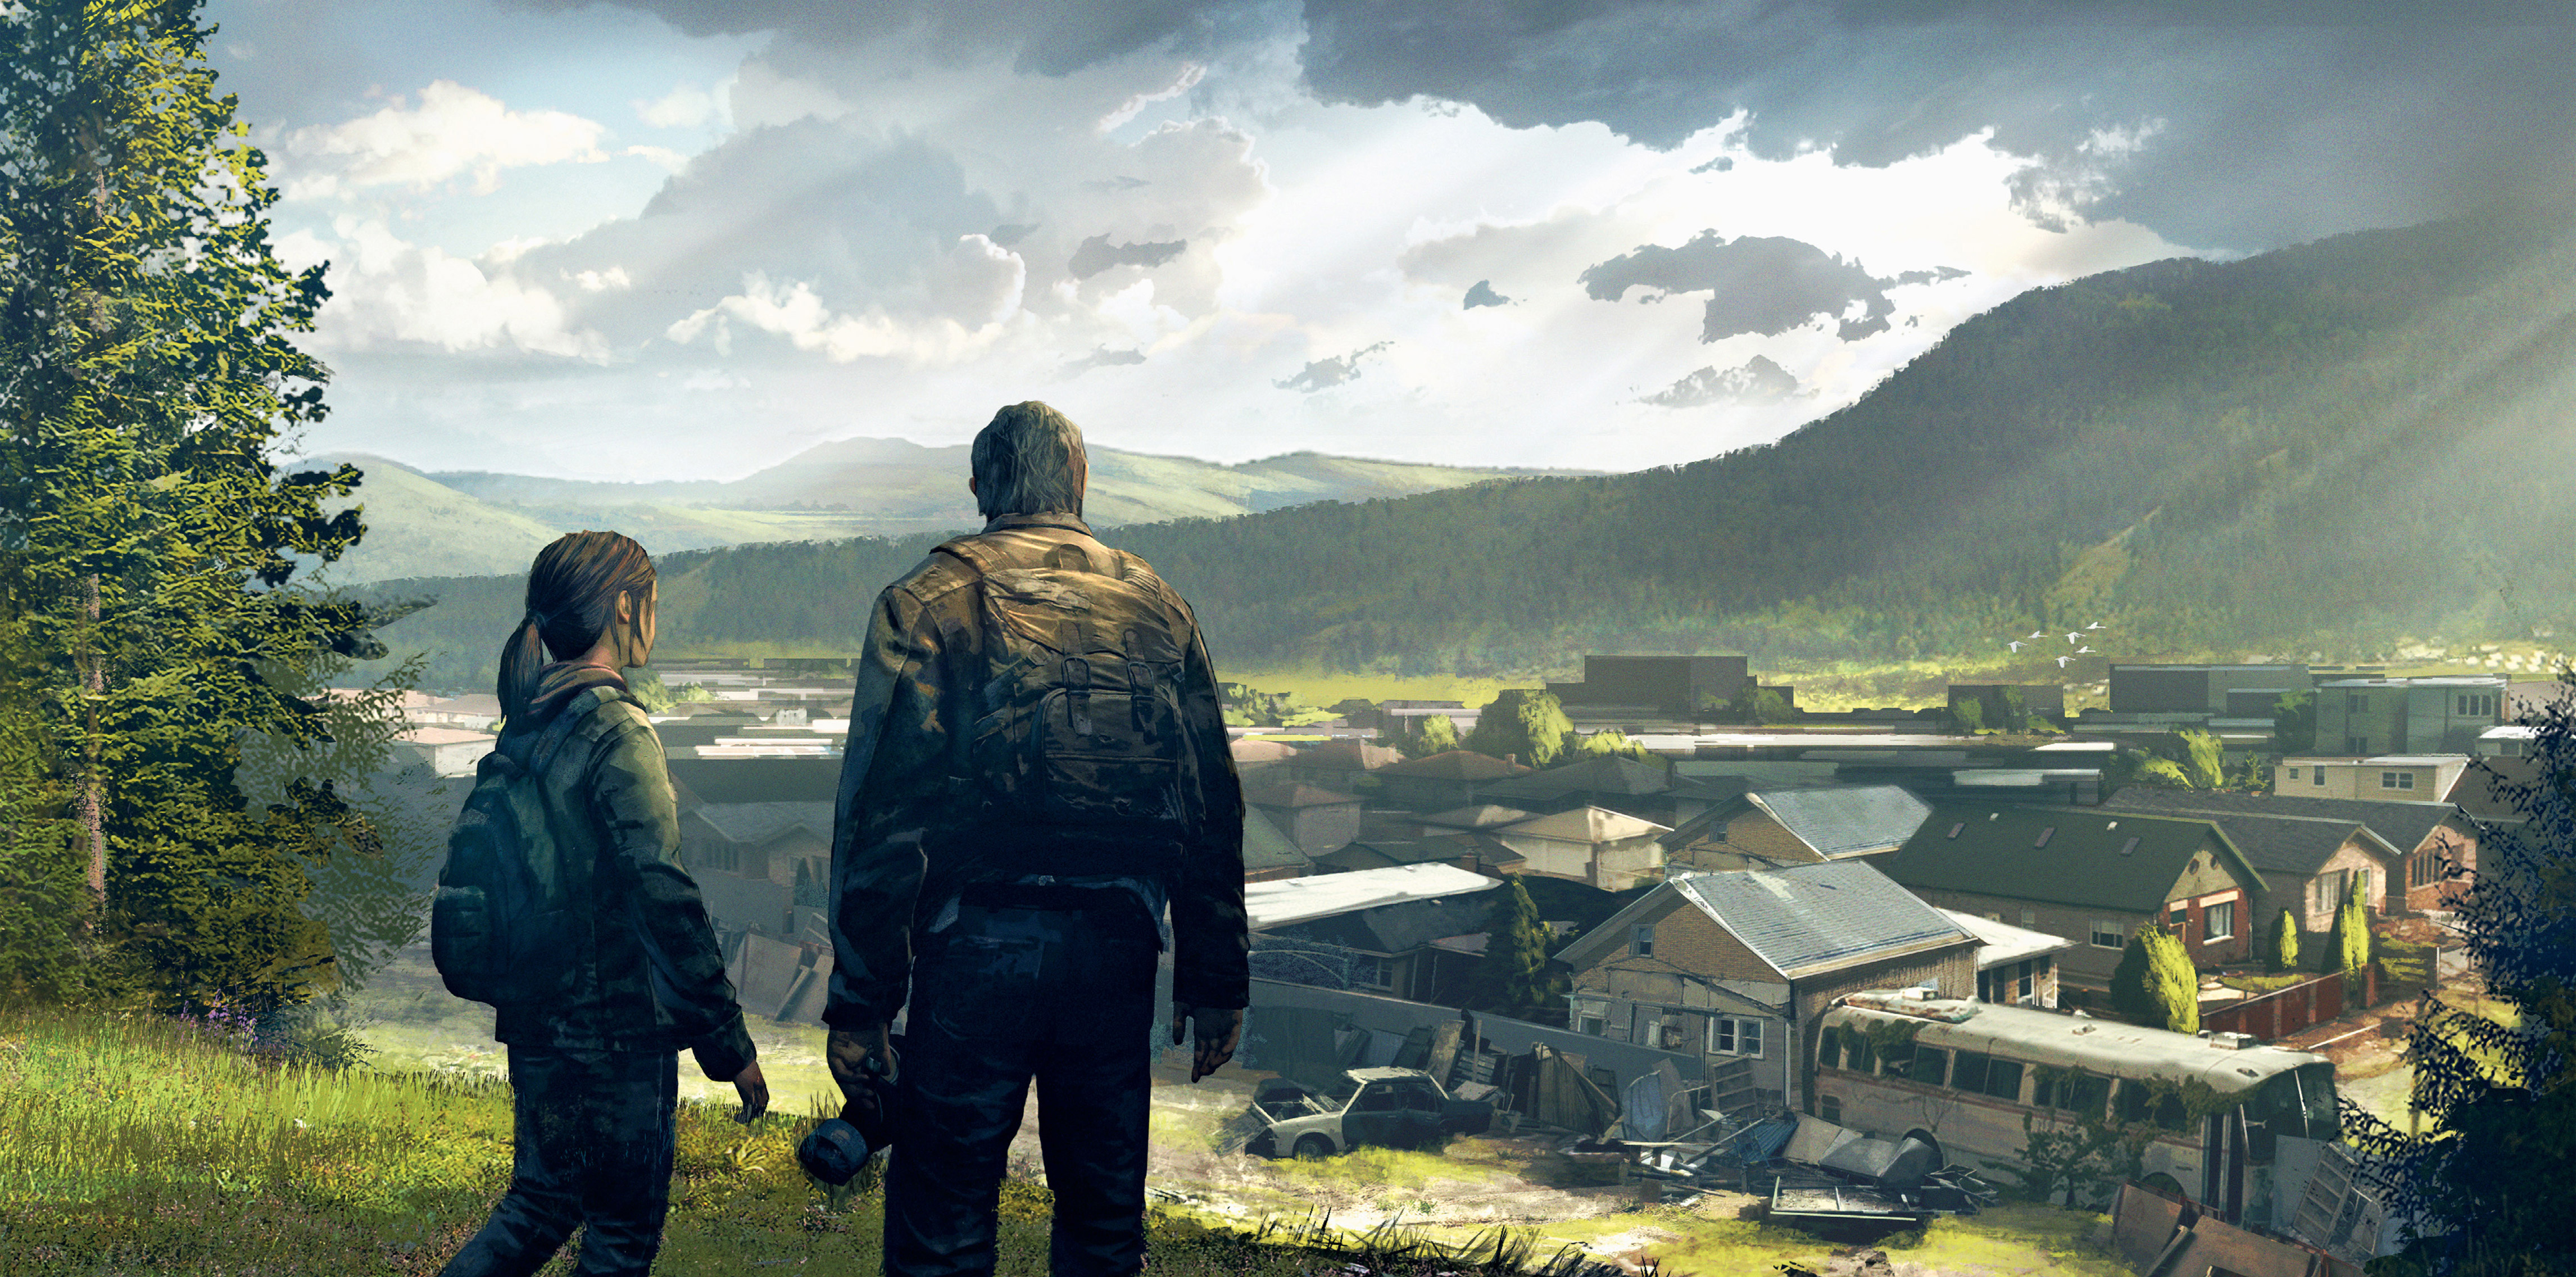 The Last Of Us wallpapers for desktop, download free The Last Of